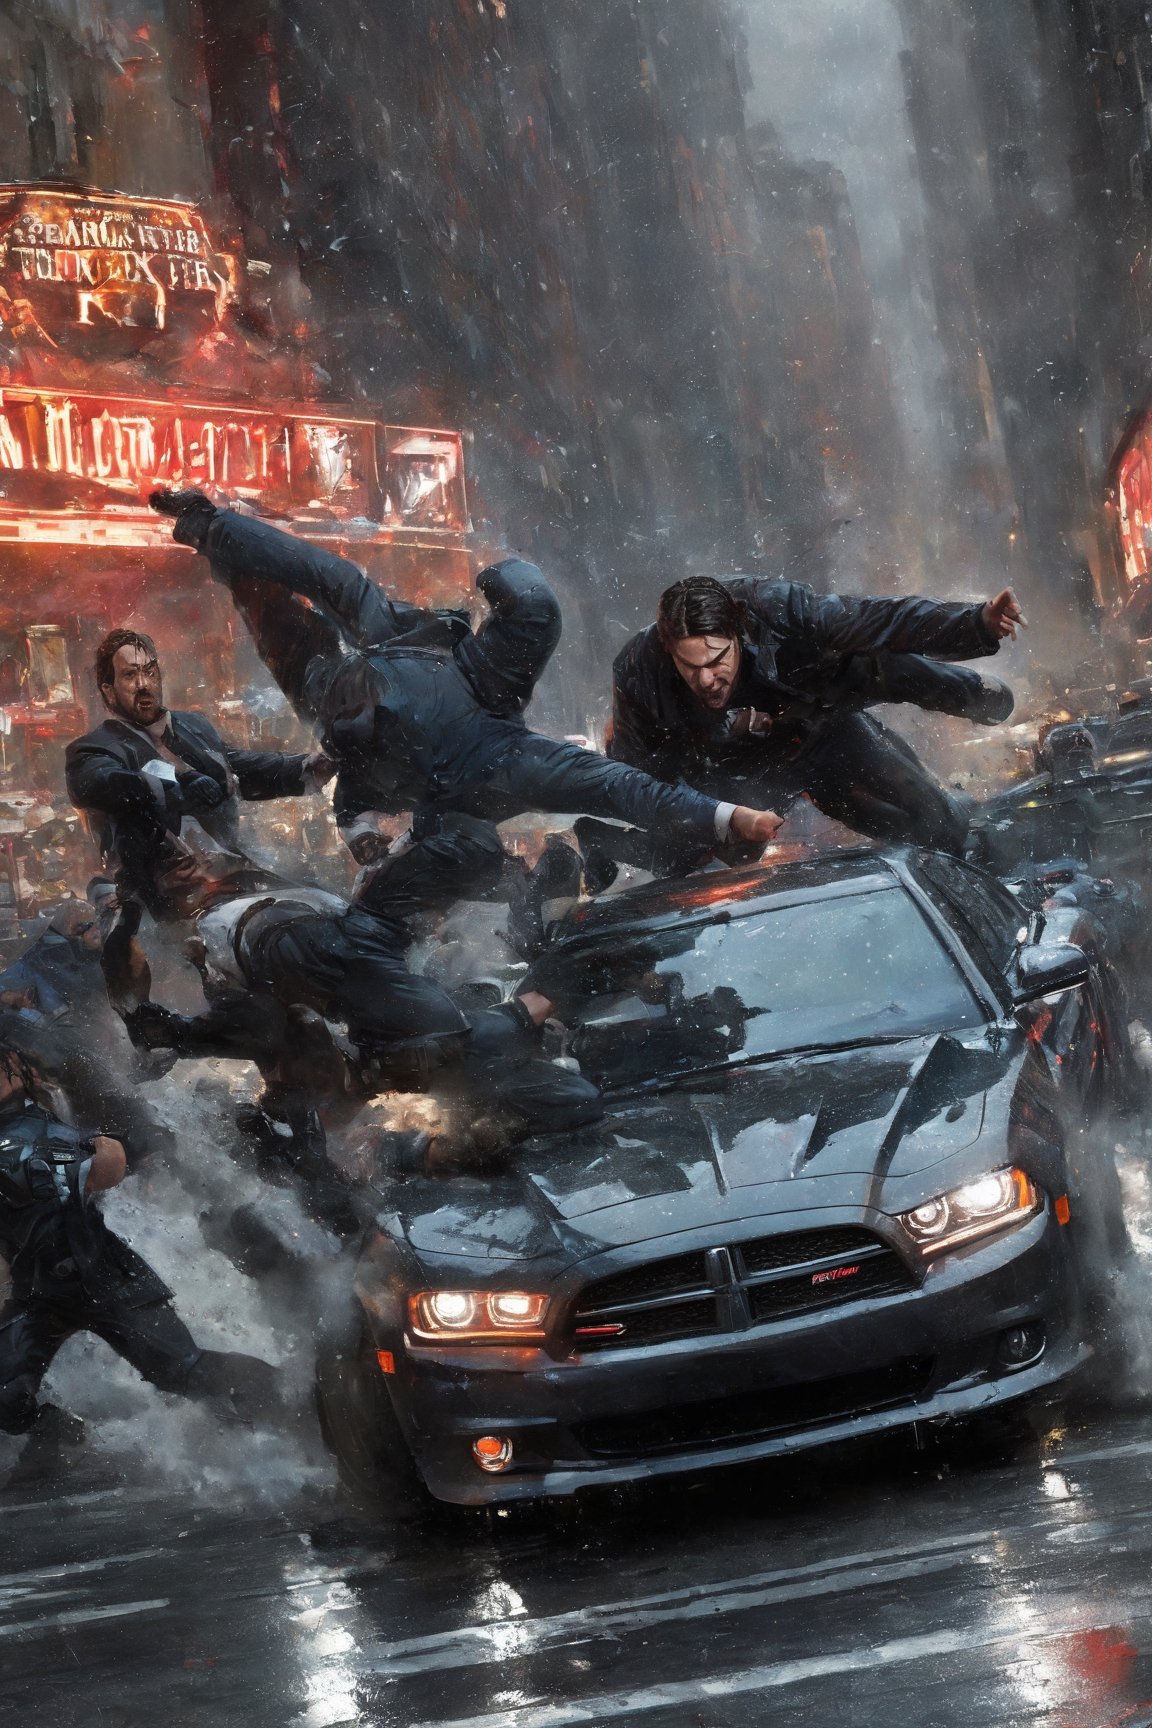 Highly detailed. John Wick fighting with 2011 DODGE CHARGER SXT in fierce combat, in new york city, close up, Thomas Kinkade